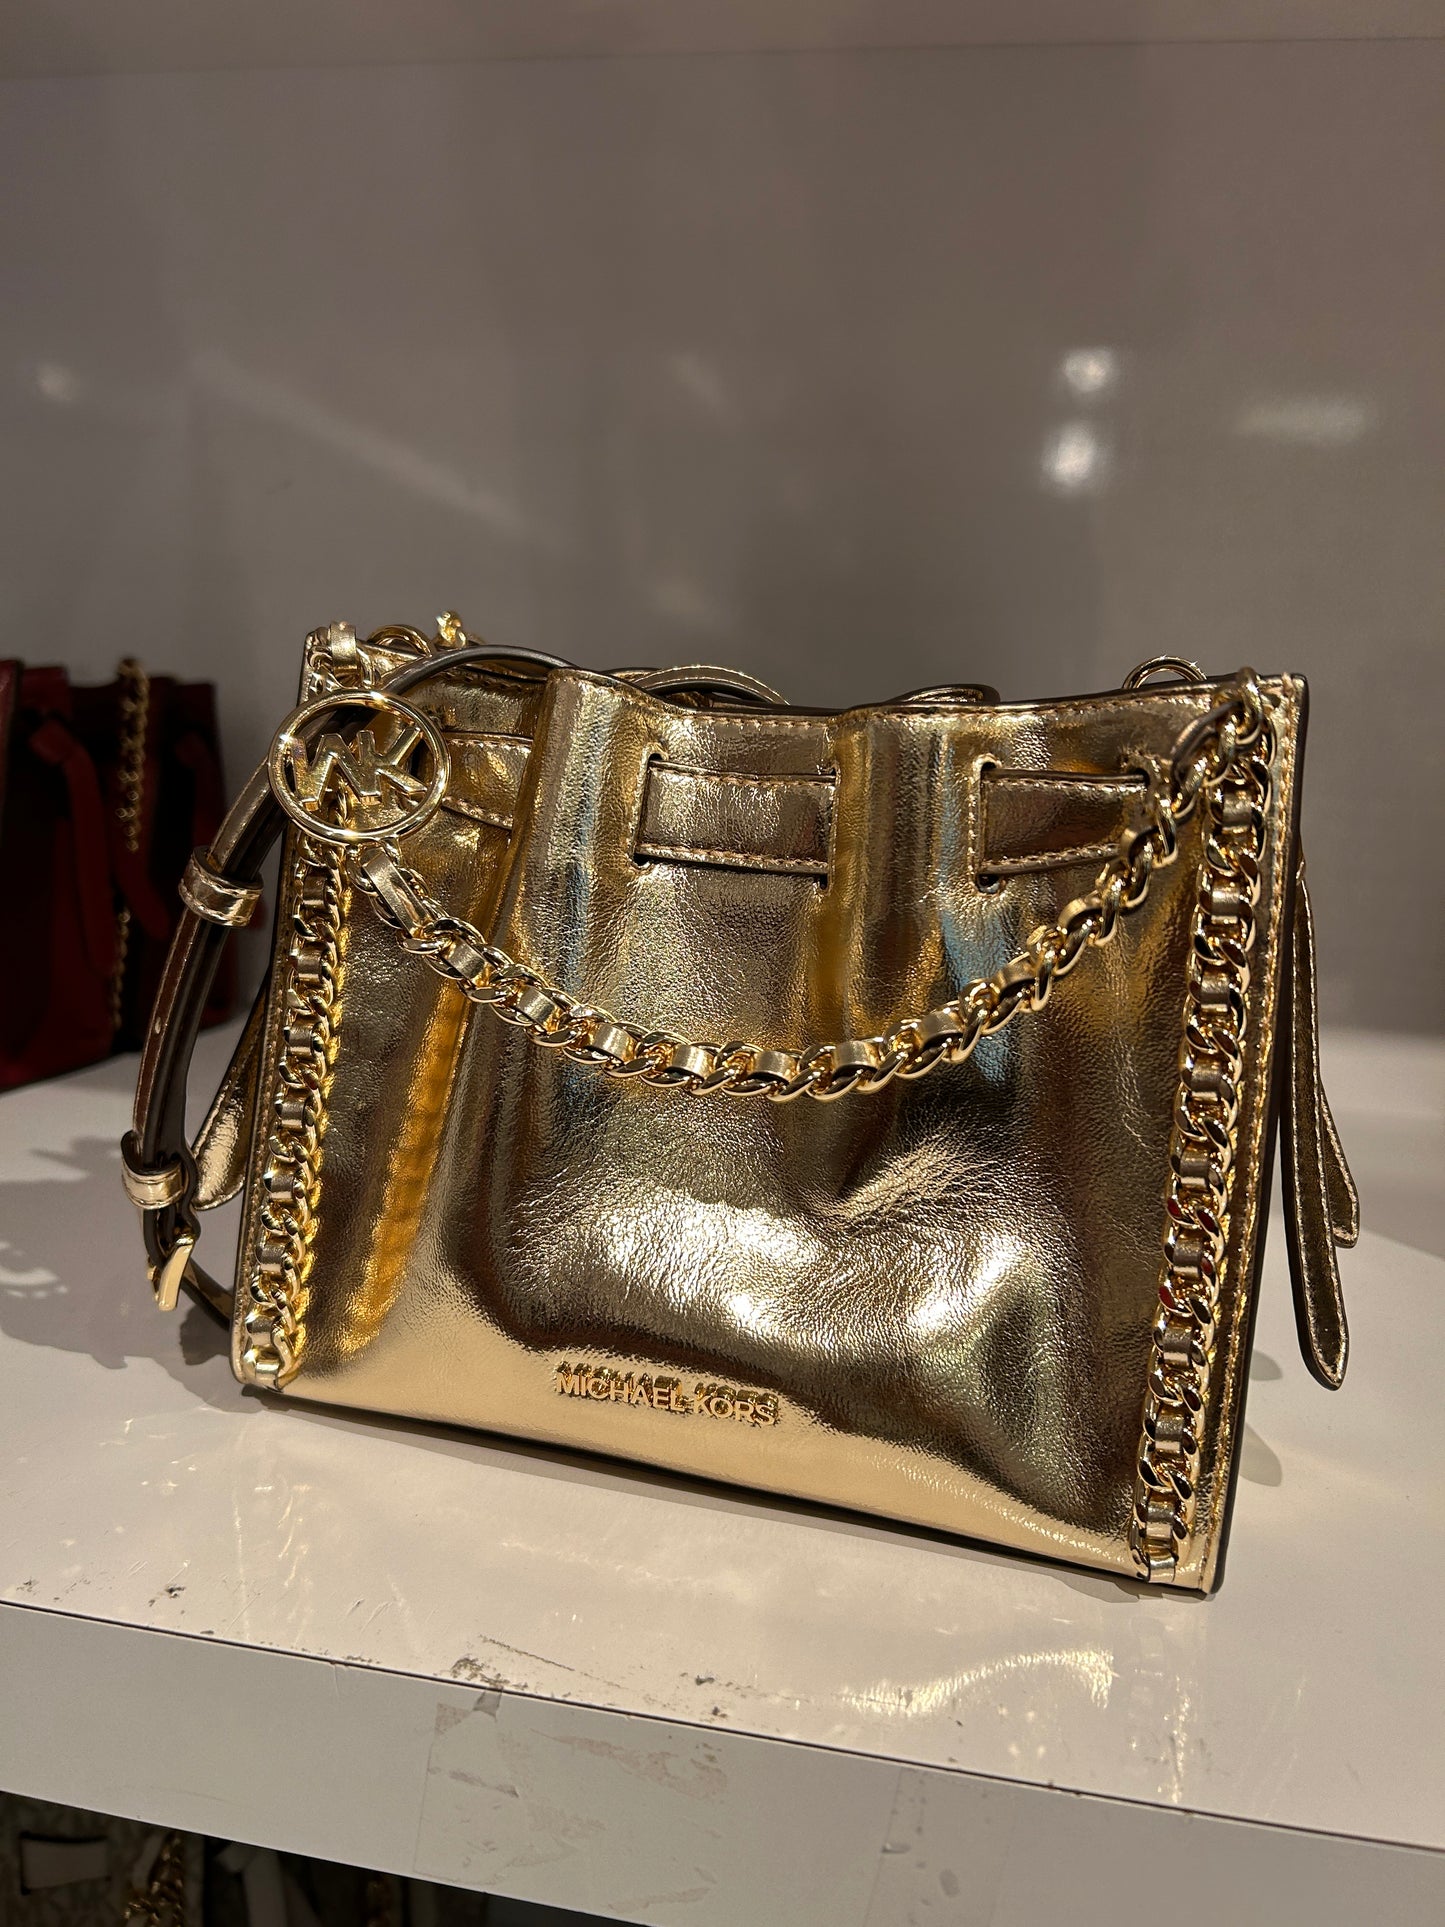 Load image into Gallery viewer, Michael Kors Mina Small Crossbody In Metallic Pale Gold (Pre-Order)
